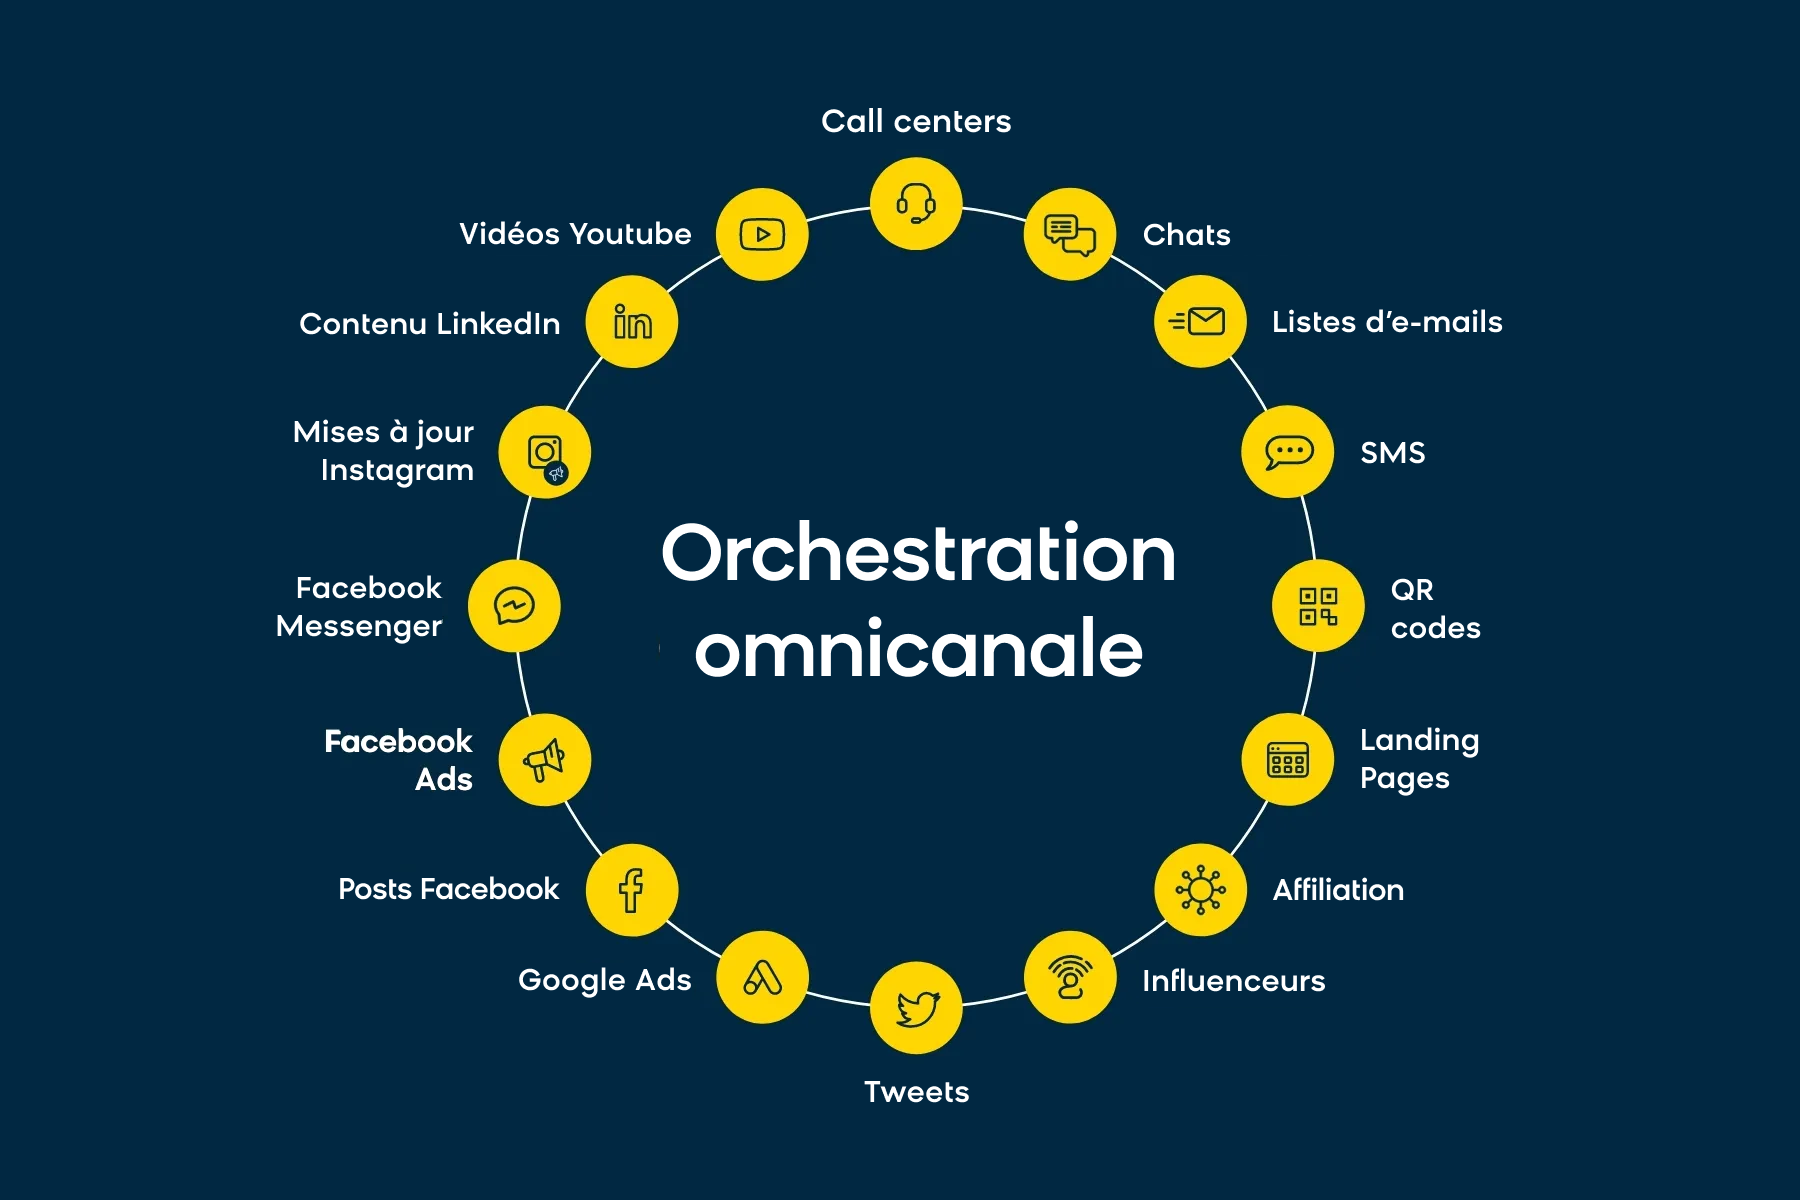 Overview of omnichannel orchestration channels